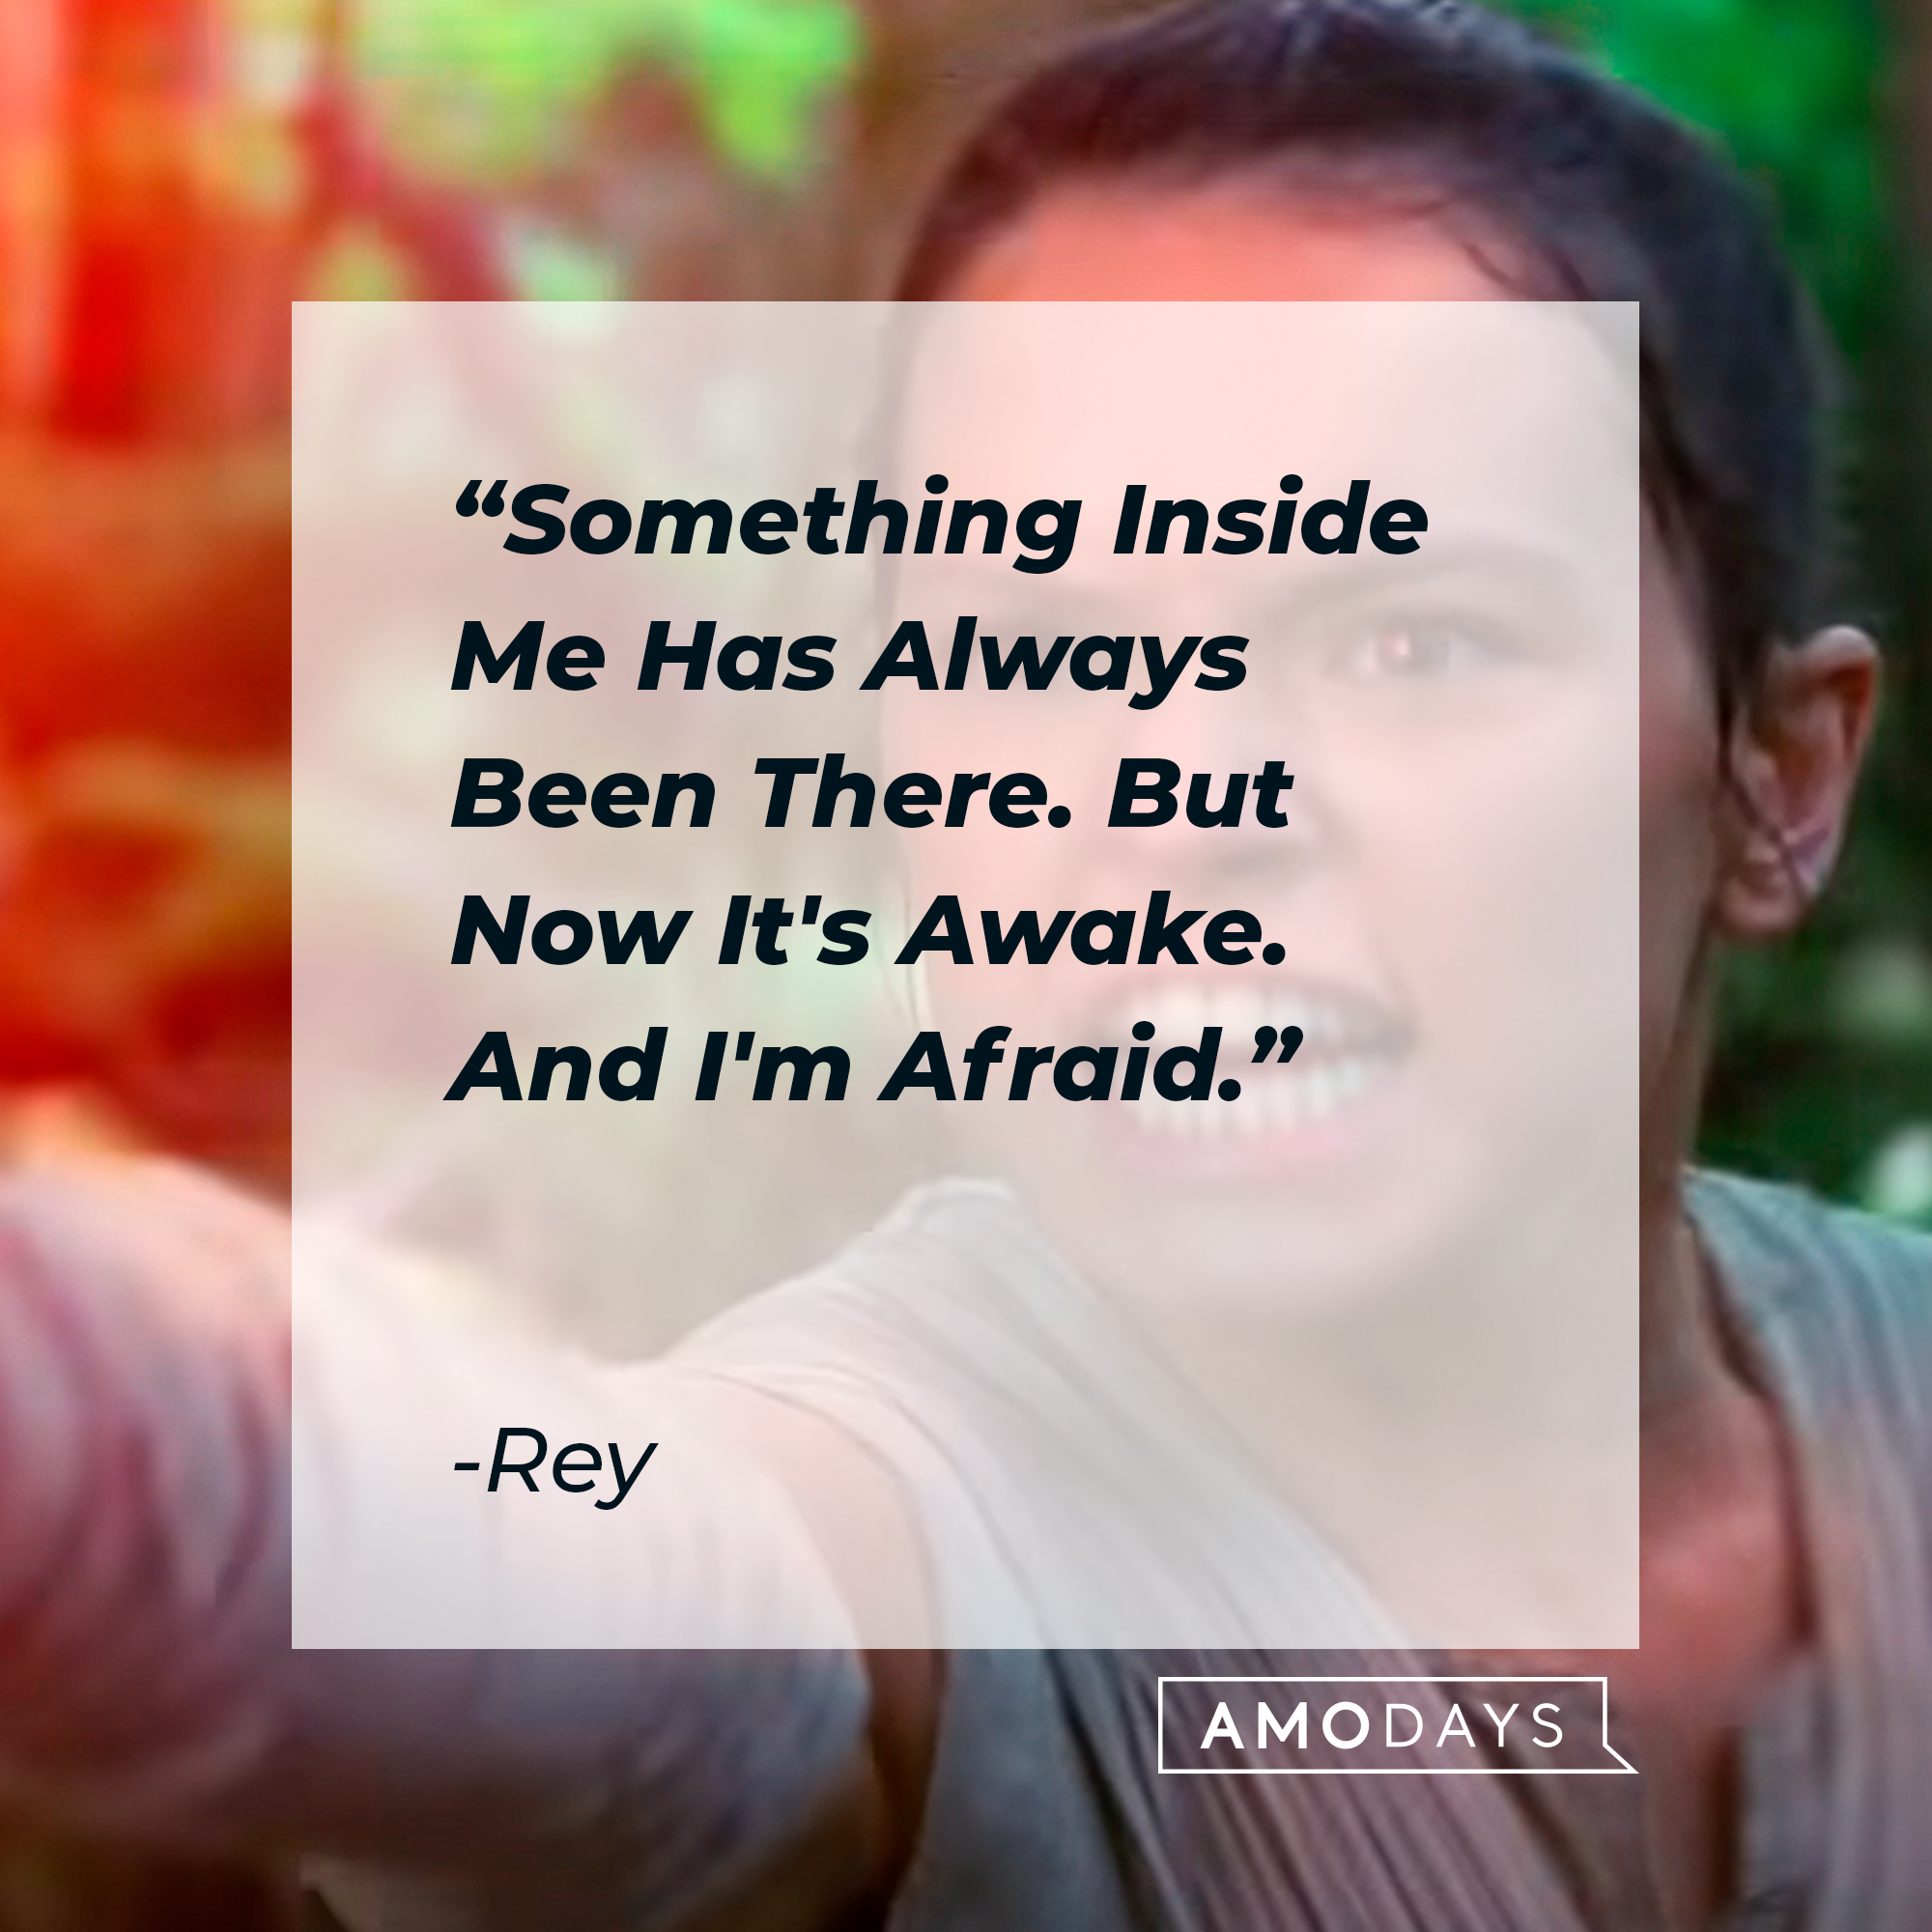 Rey's quote: "Something Inside Me Has Always Been There. But Now It's Awake. And I'm Afraid."┃Source: youtube.com/StarWars